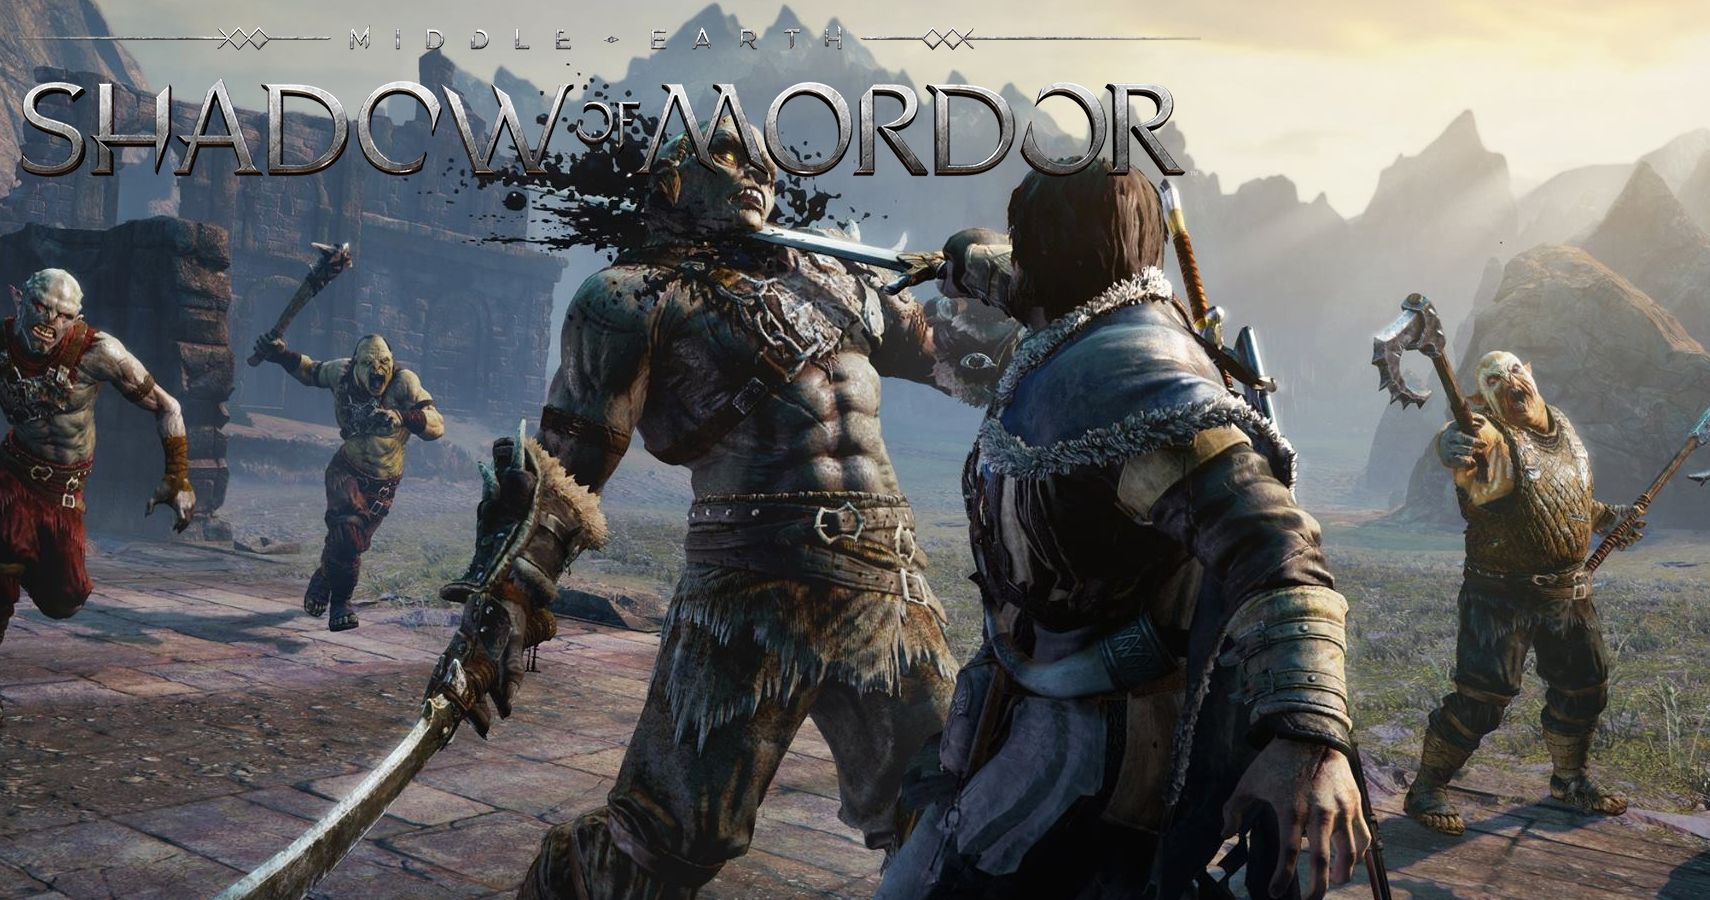 Shadow of Mordor's servers have shut down, but the final update